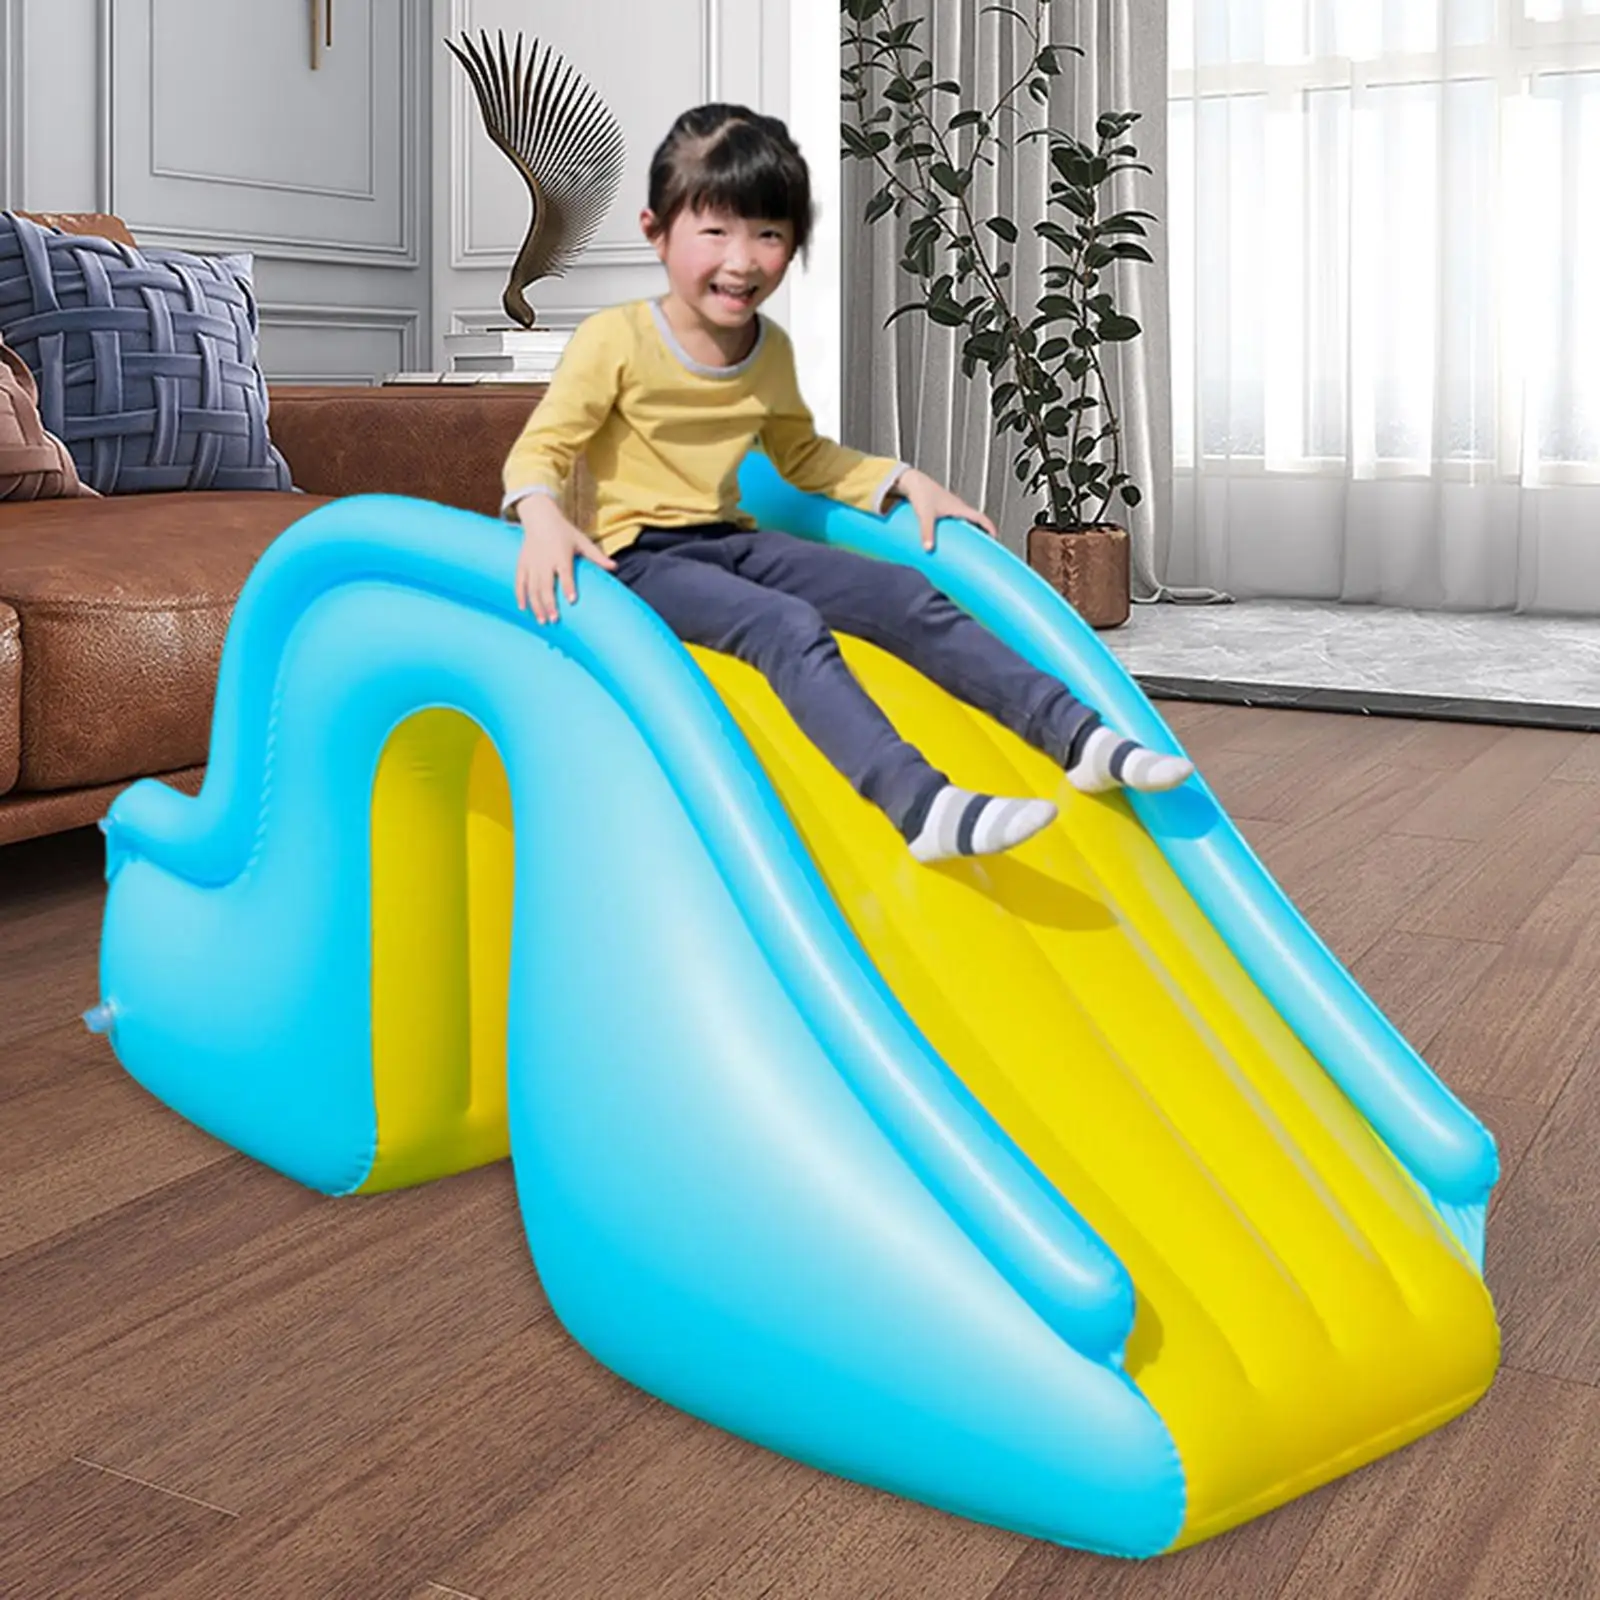 Inflatable Pool Slide PVC Easy Portability Folding Waterslide for Garden Paddling Pool above Ground Pool Yard Water Play Toys